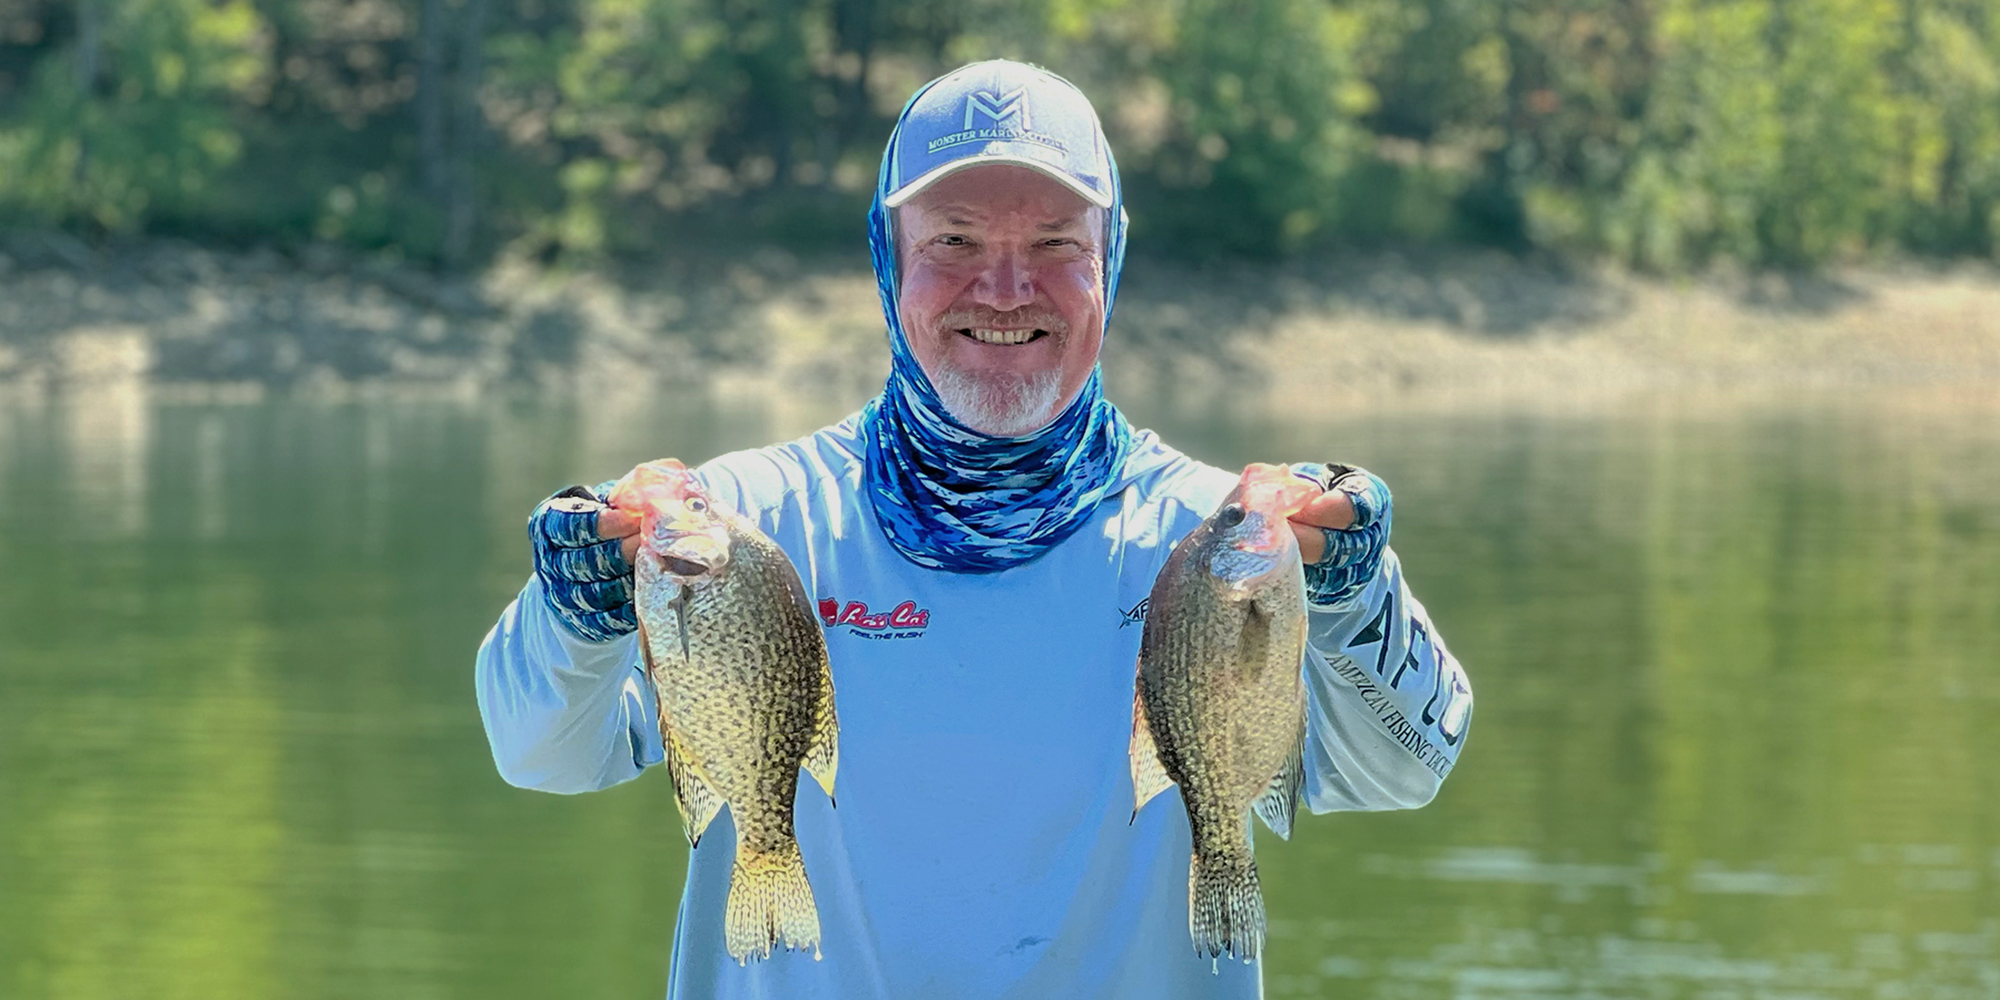 Davis shares guide tips for catching fall crappie - Major League